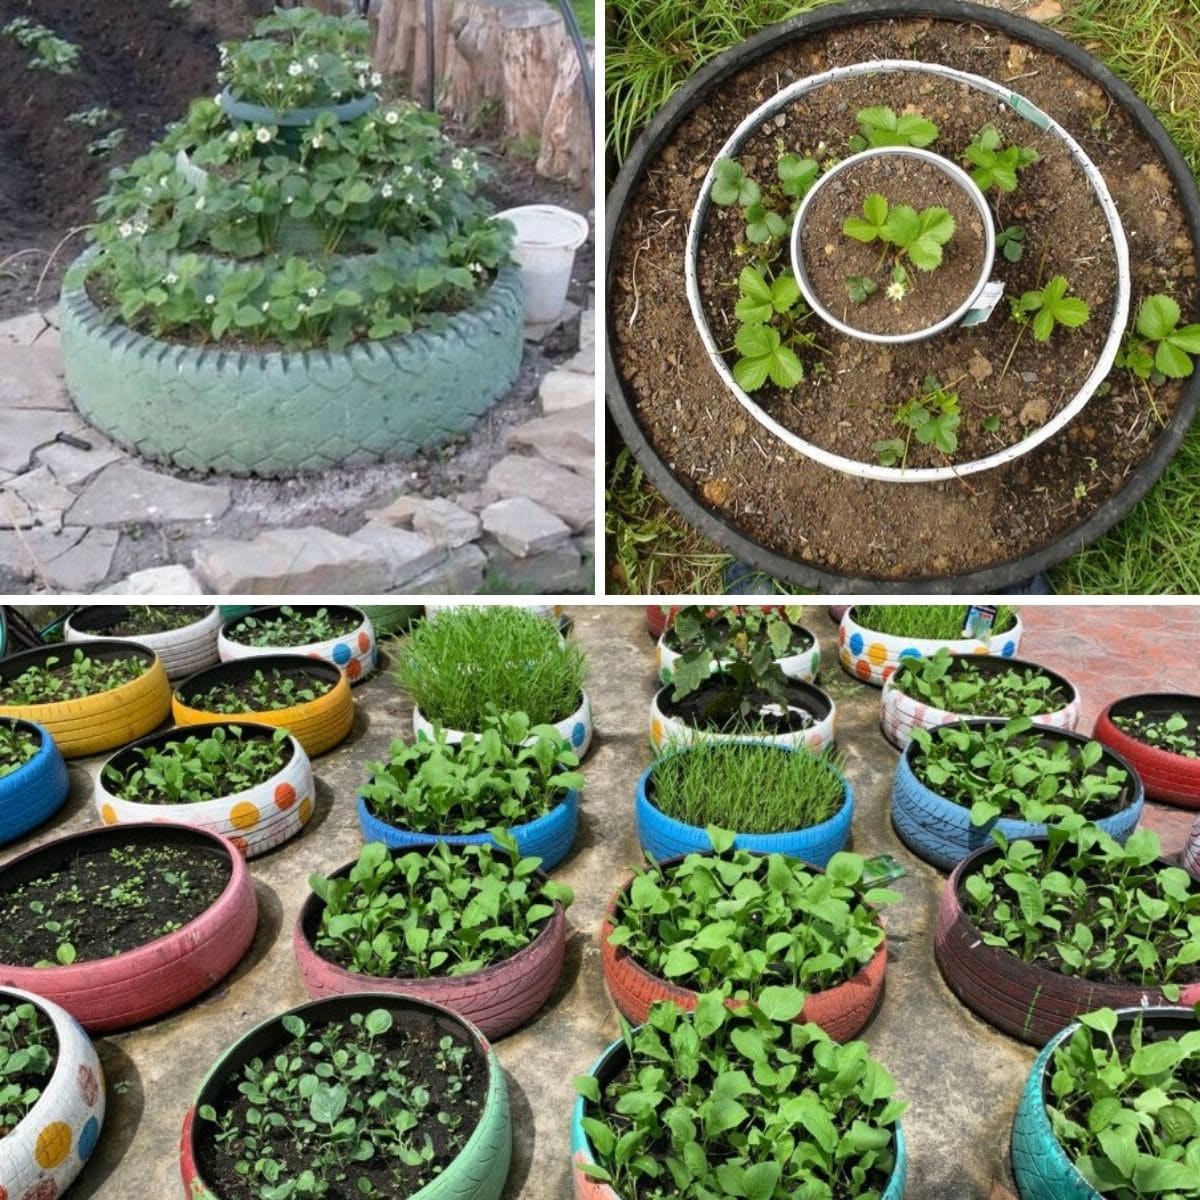 Tire tower strawberry planters.